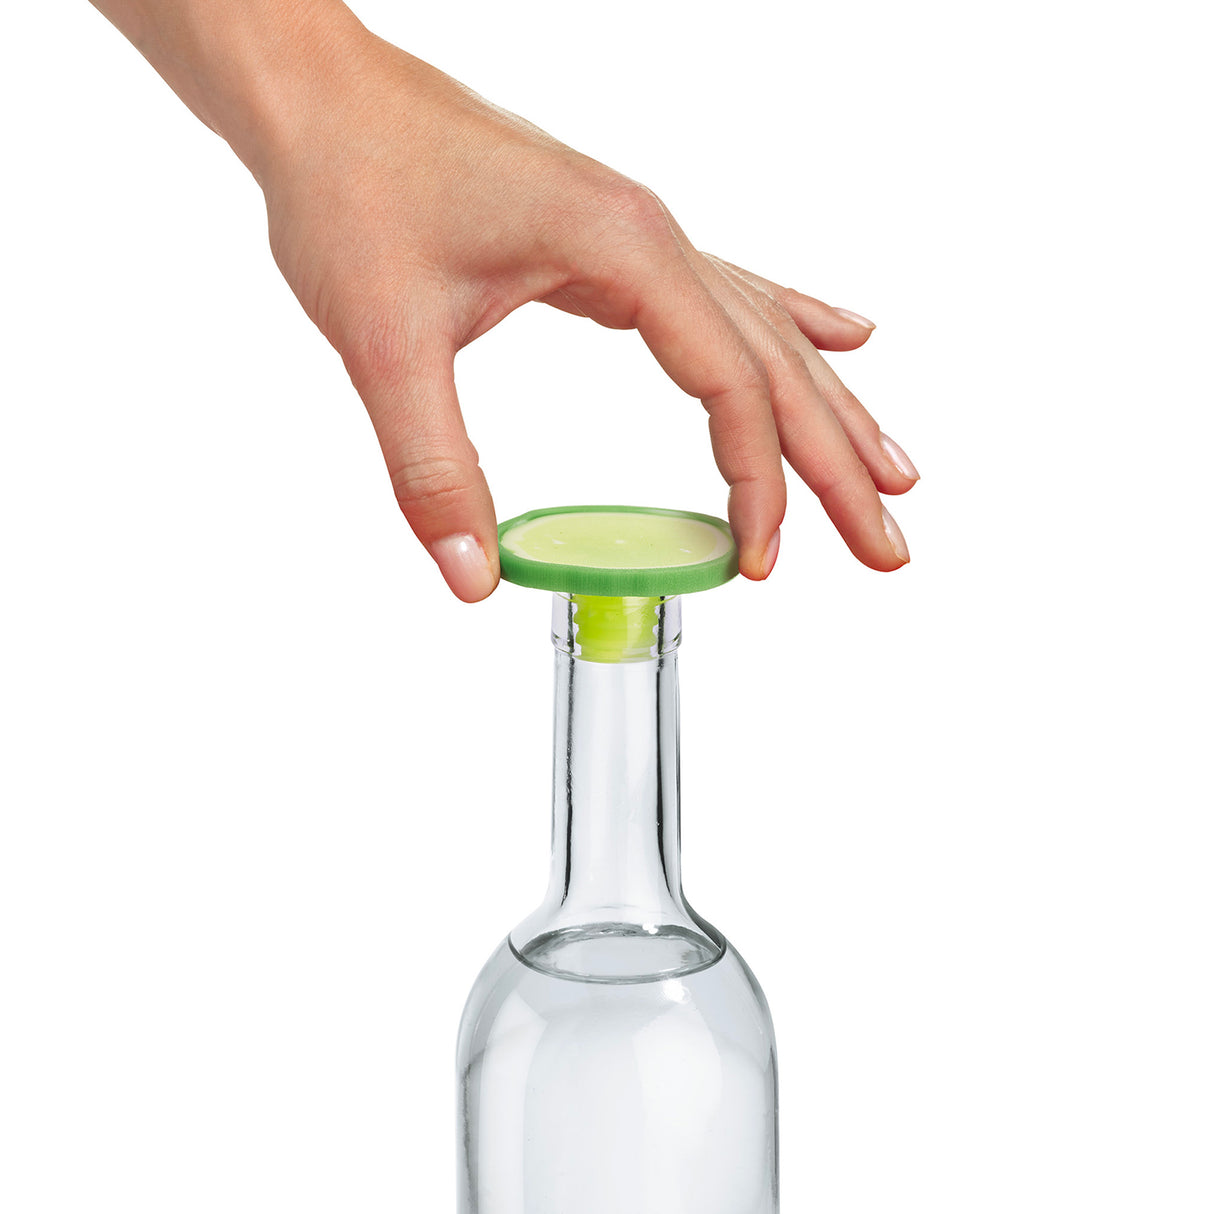 CHARLES-VIANCIN-10505-LIME-BOTTLE-STOPPERS-SILICONE-HANDLE.jpg